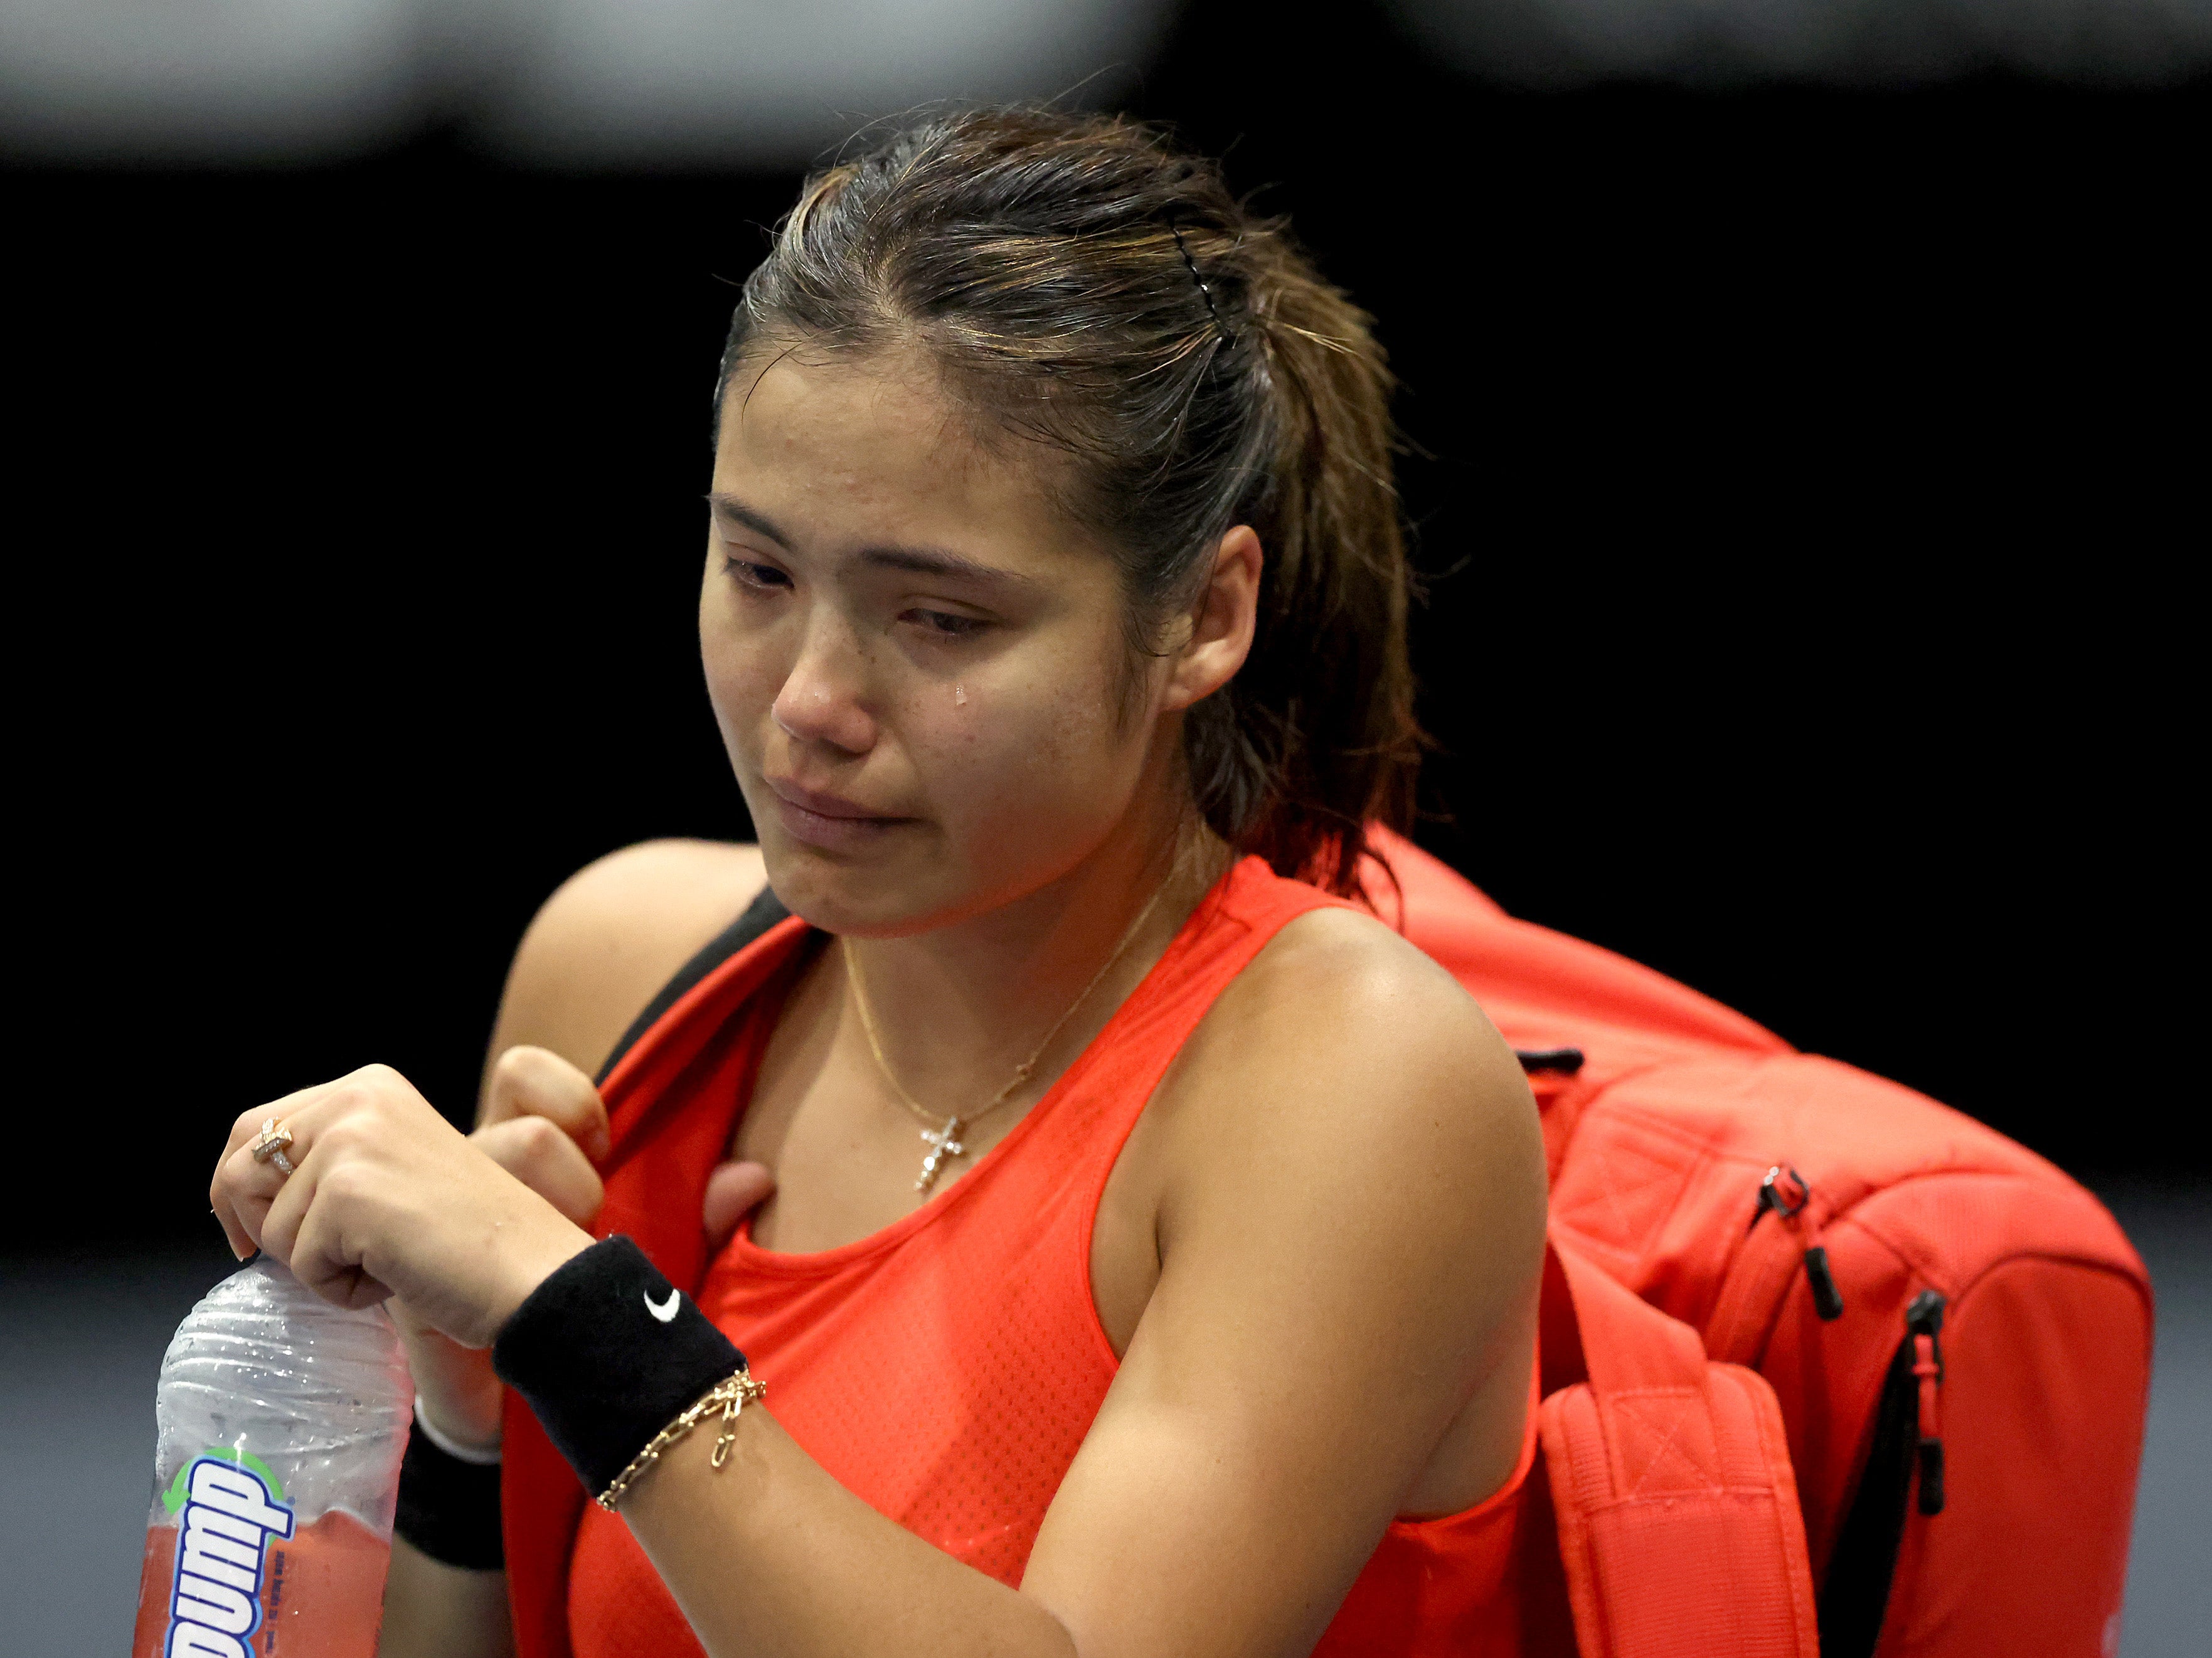 Emma Raducanu endured a tearful exit from a tournament in Auckland after suffering an injury